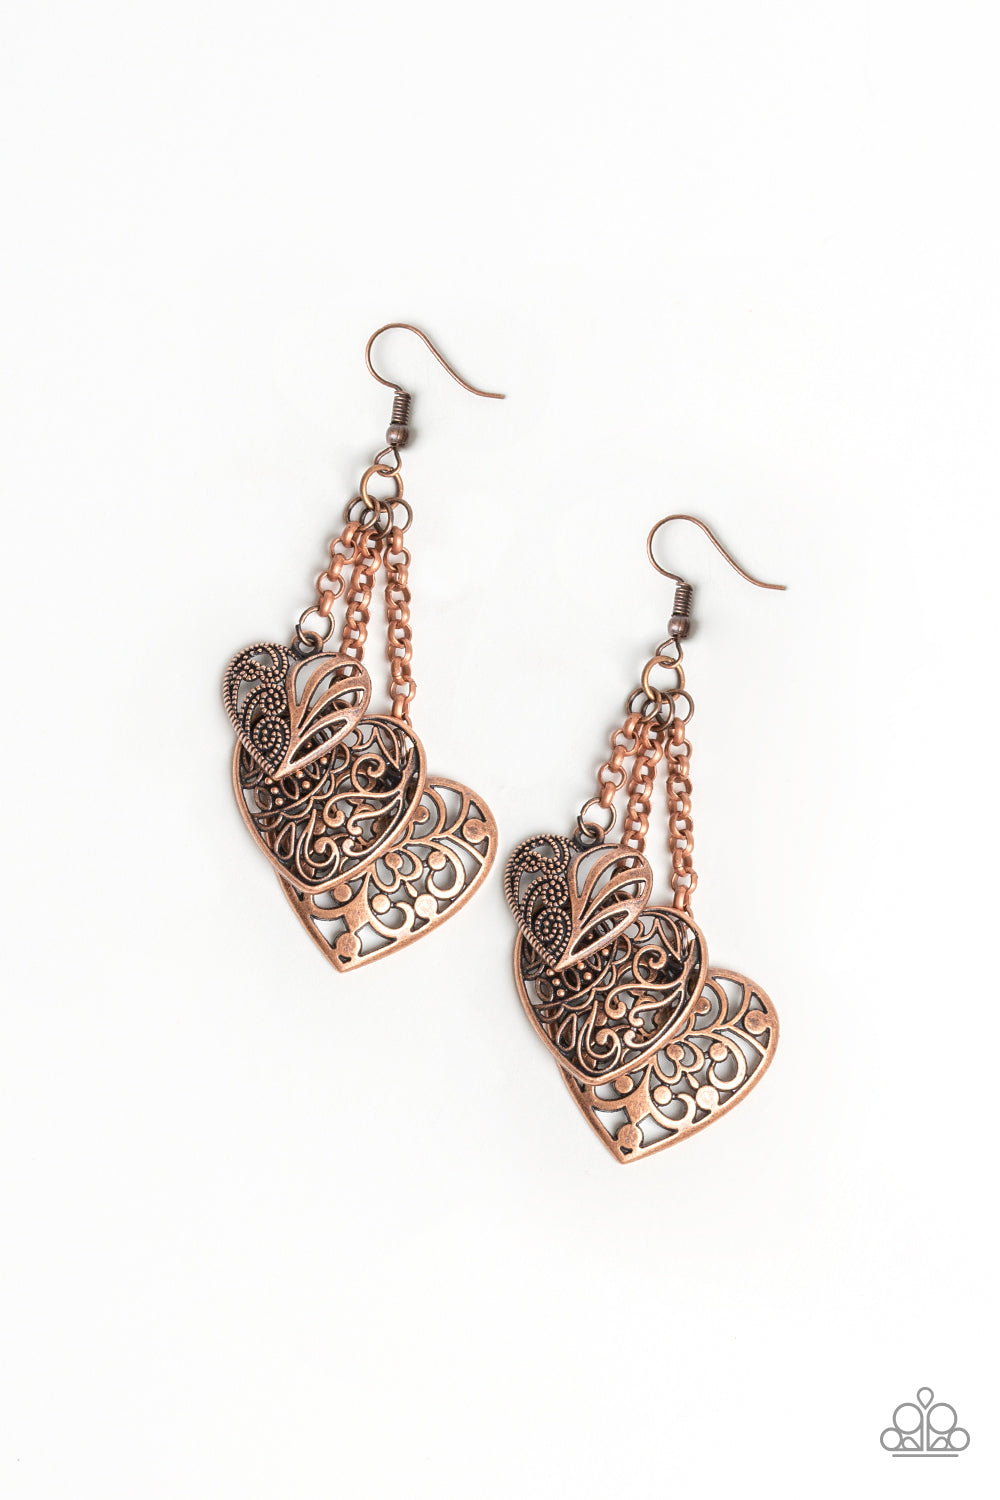 Once Upon A Heart Copper Paparazzi Earrings Cashmere Pink Jewels - Cashmere Pink Jewels & Accessories, Cashmere Pink Jewels & Accessories - Paparazzi